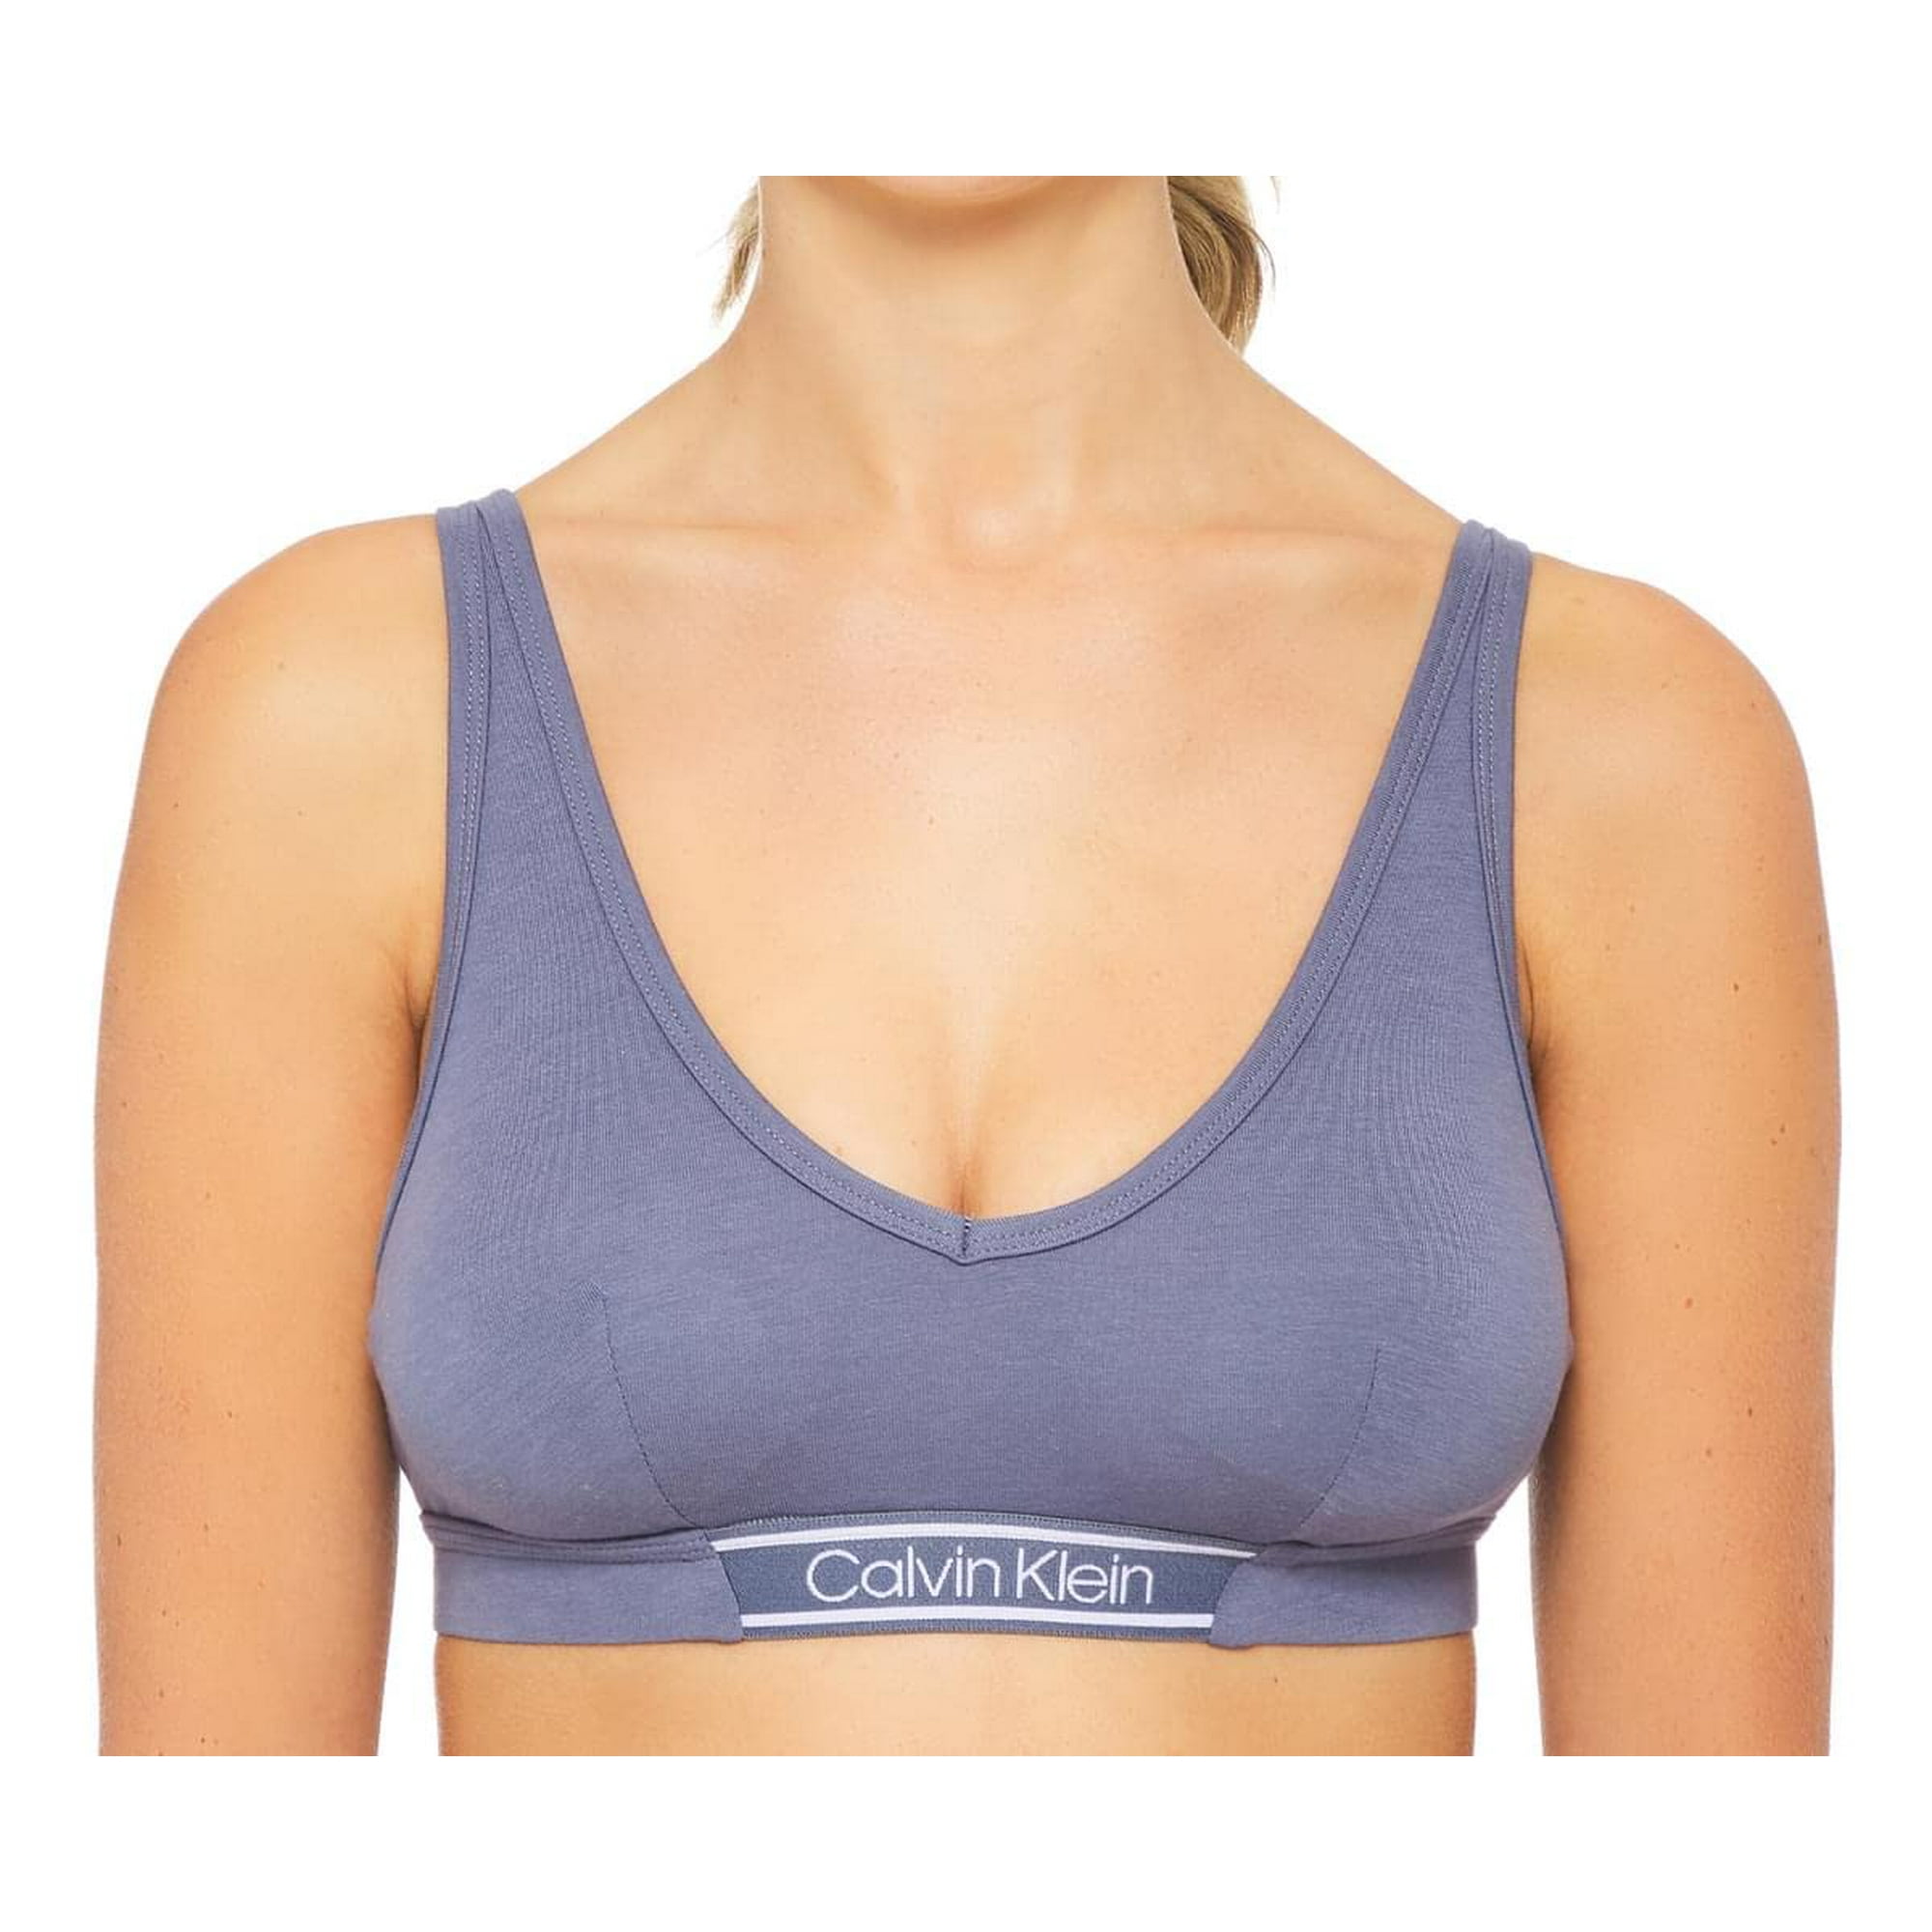 Calvin Klein Women's The Ultimate Comfort Lightly Lined Bralette (Small)  Blue-Gray | Walmart Canada